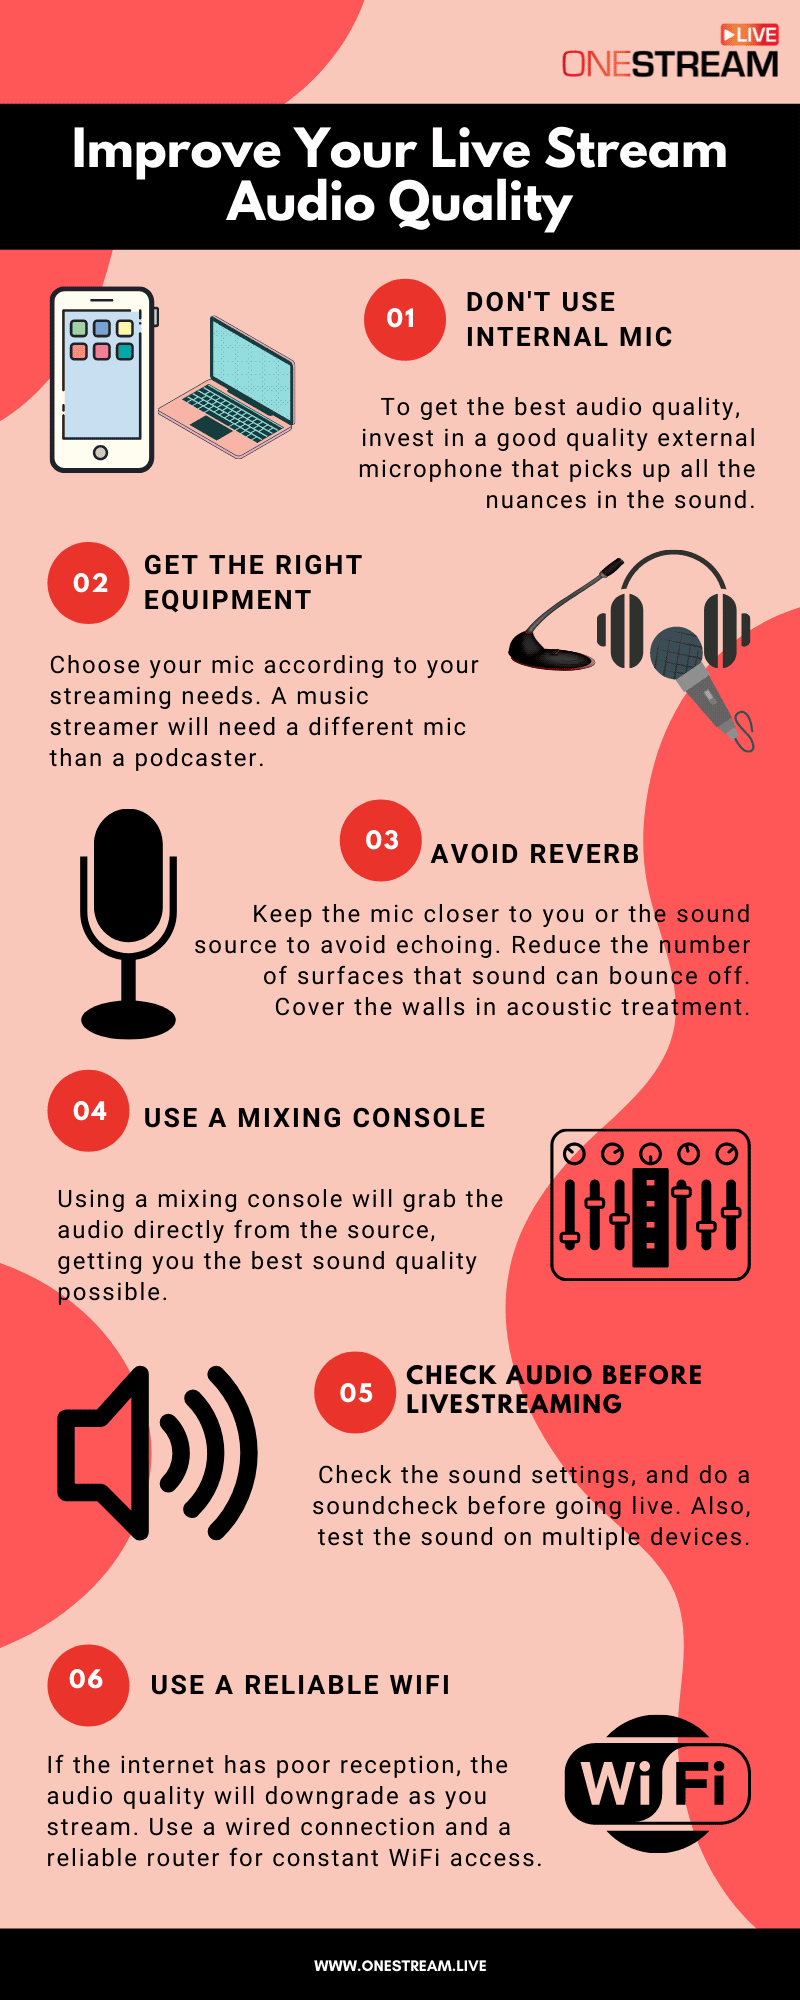 6 ways to improve audio quality of your live streams